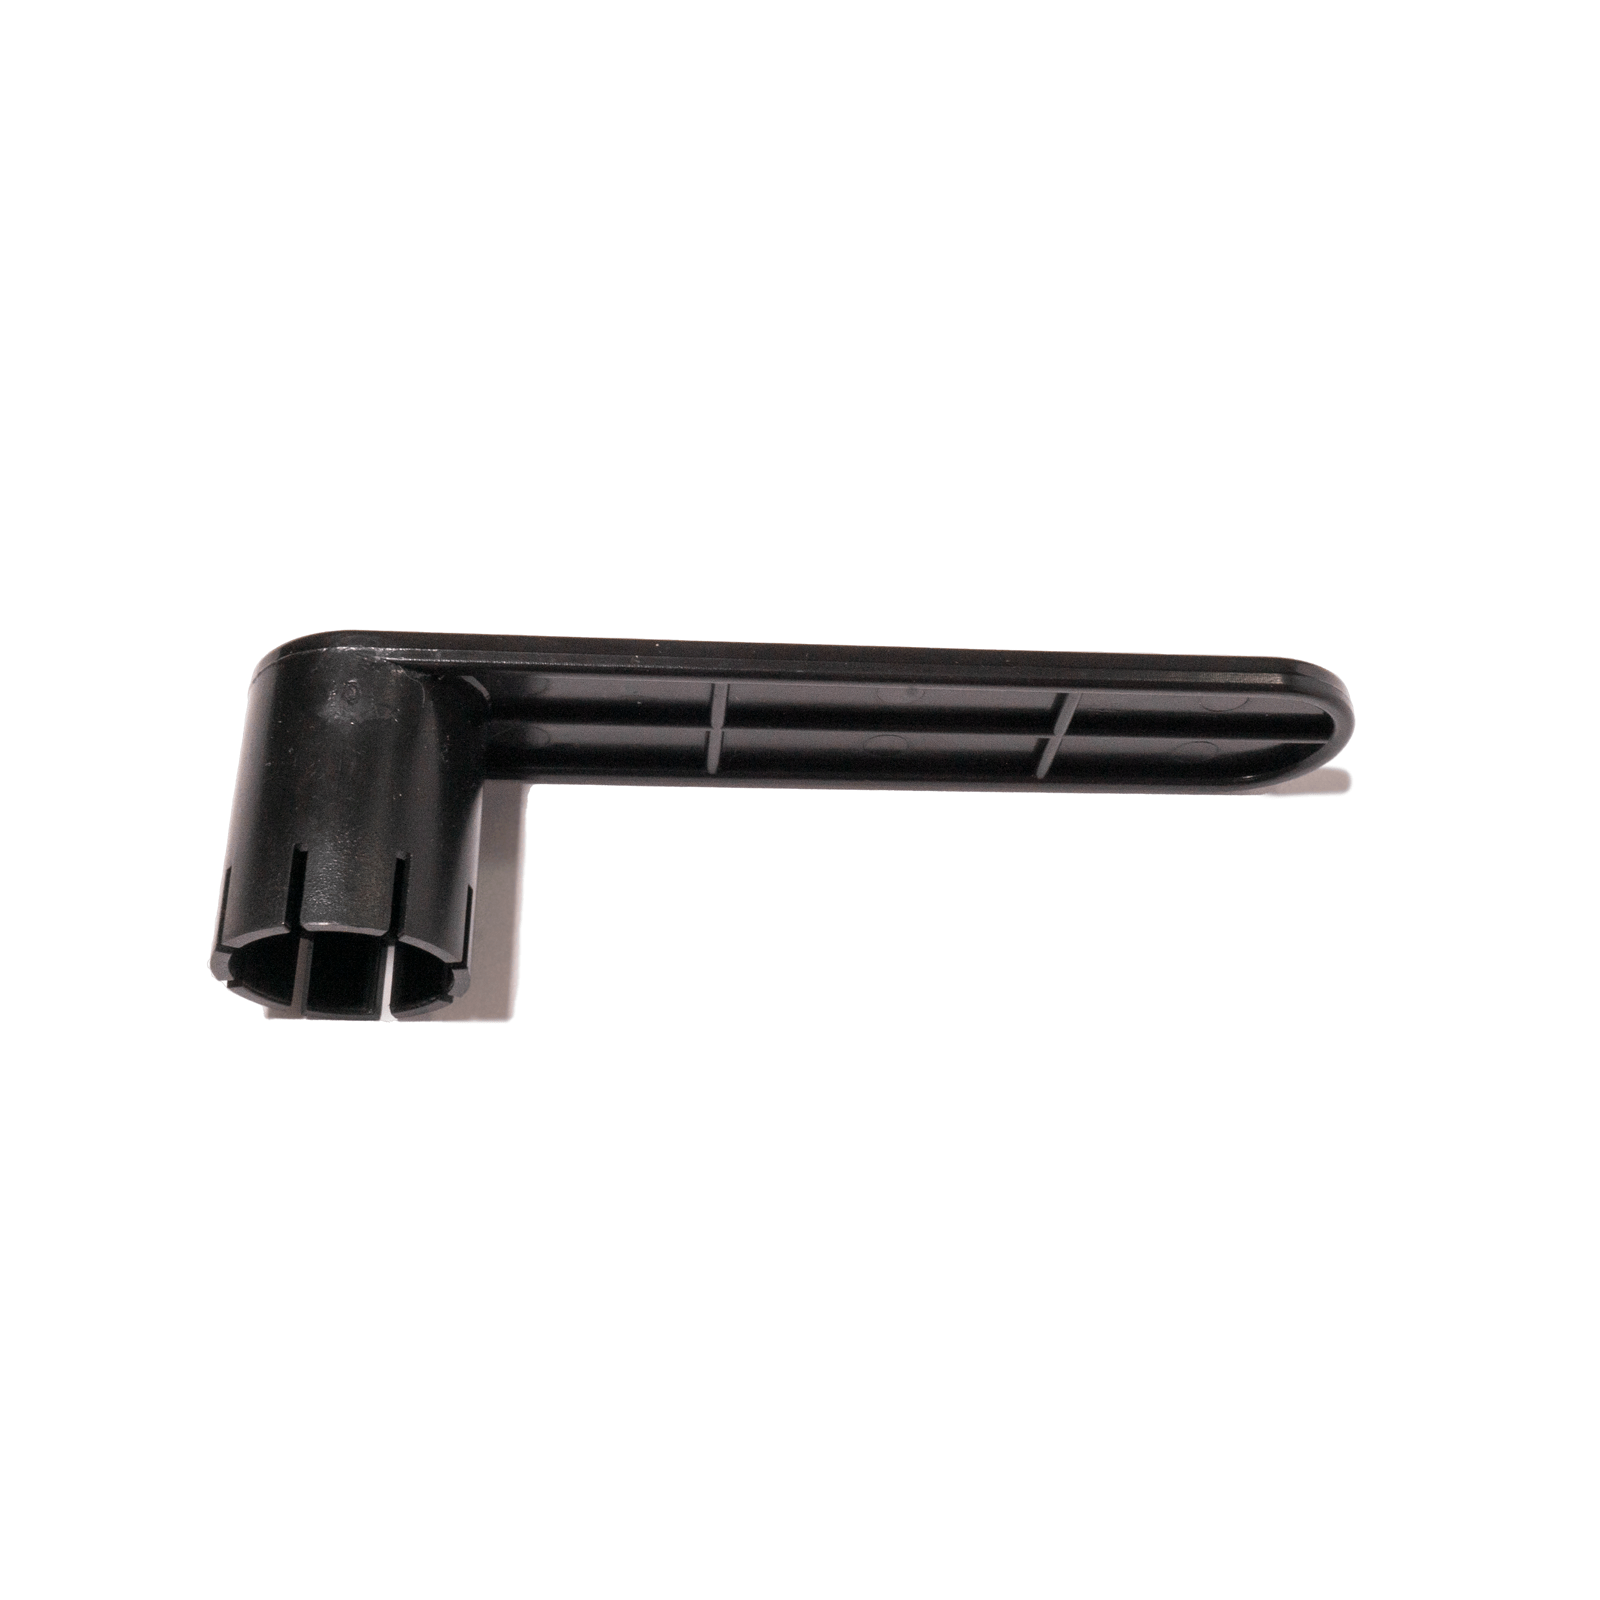 Air Valve Replacement Wrench (Halkey-Roberts) - Swellfish Outdoor Equipment Co.